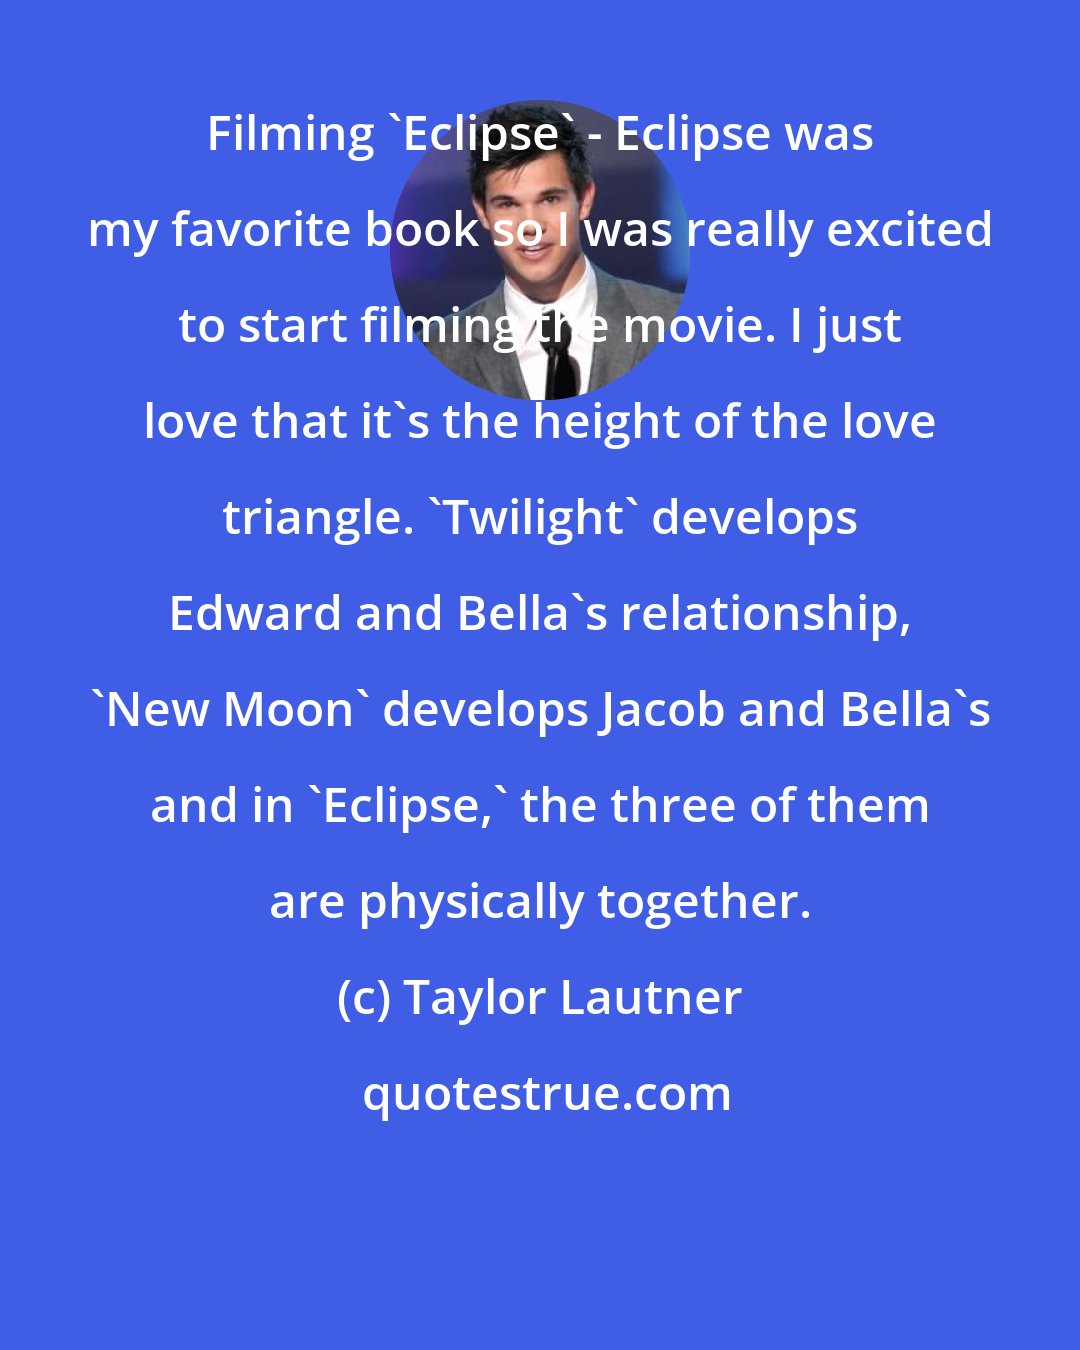 Taylor Lautner: Filming 'Eclipse' - Eclipse was my favorite book so I was really excited to start filming the movie. I just love that it's the height of the love triangle. 'Twilight' develops Edward and Bella's relationship, 'New Moon' develops Jacob and Bella's and in 'Eclipse,' the three of them are physically together.